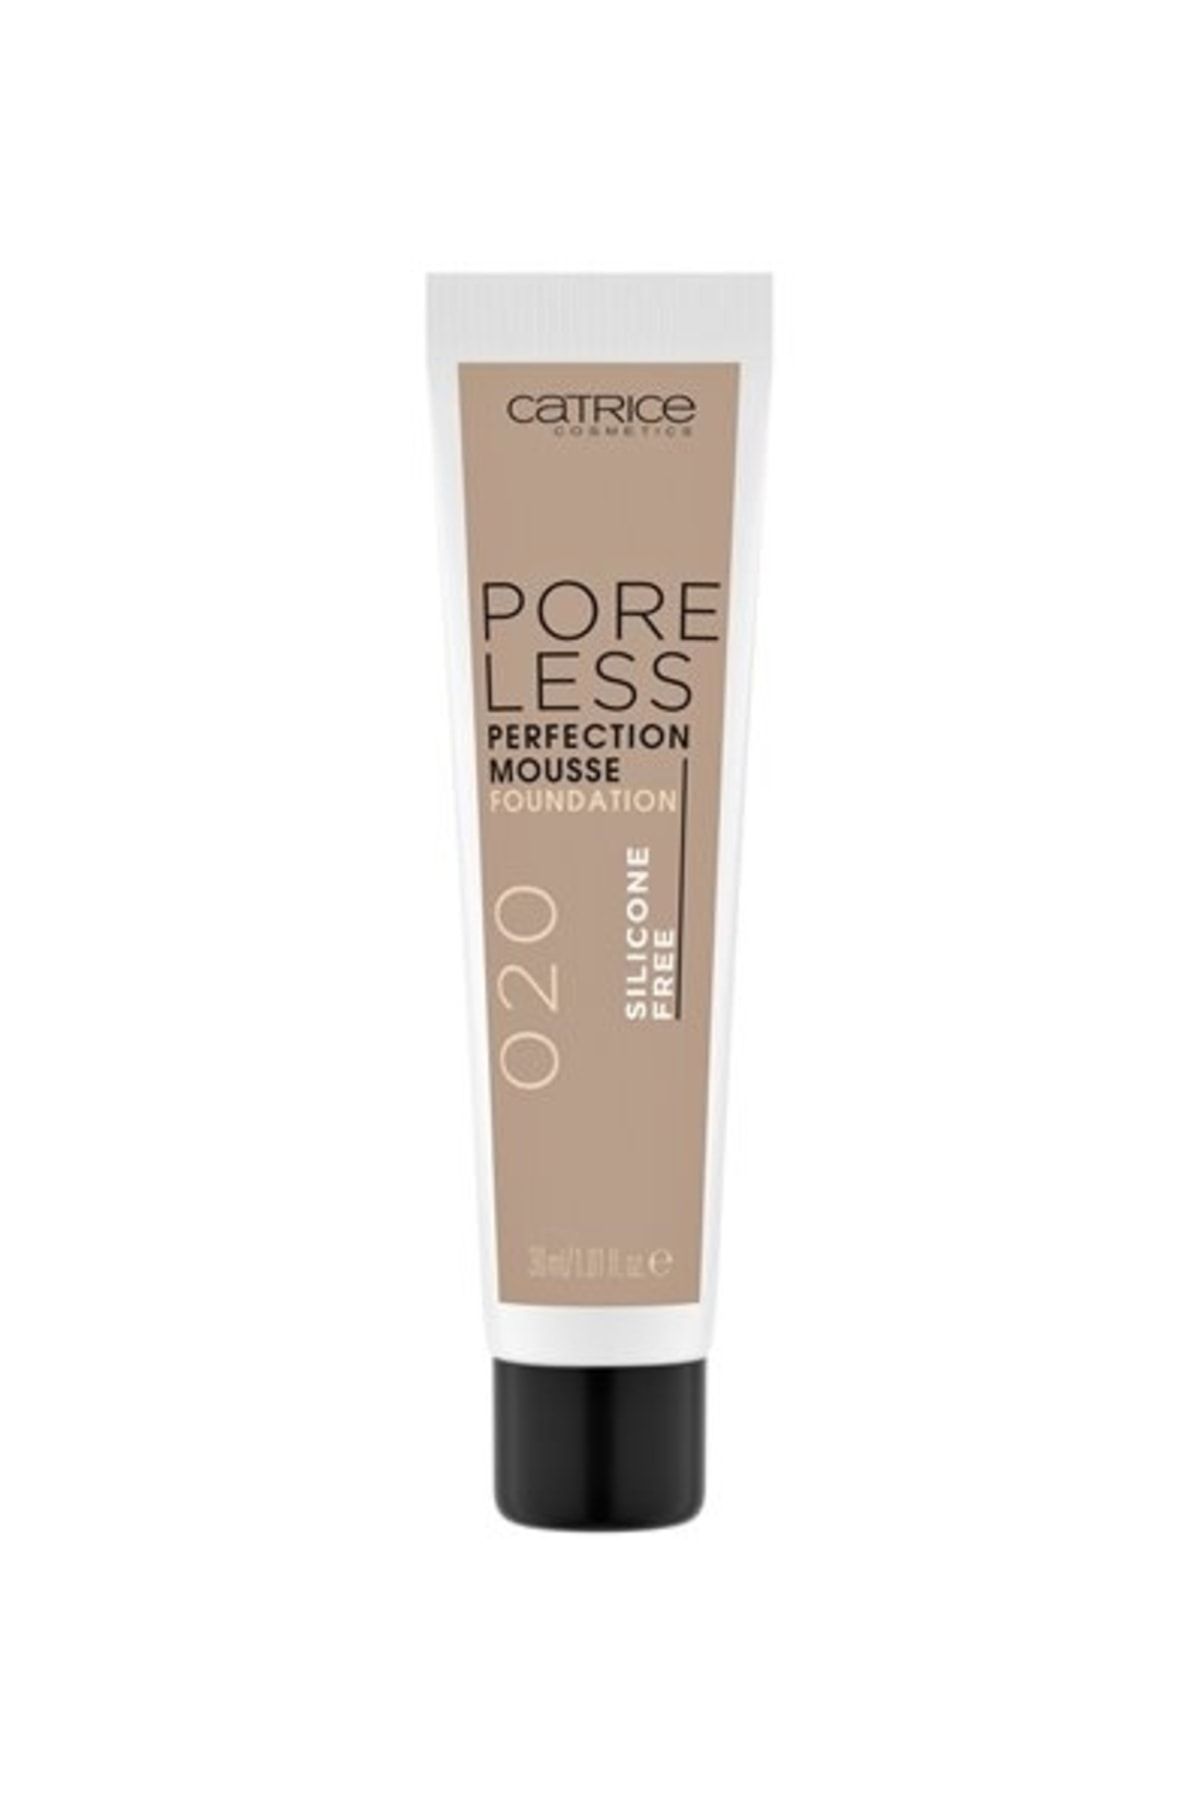 Catrice Pore Less Perfection Mousse Foundation 020